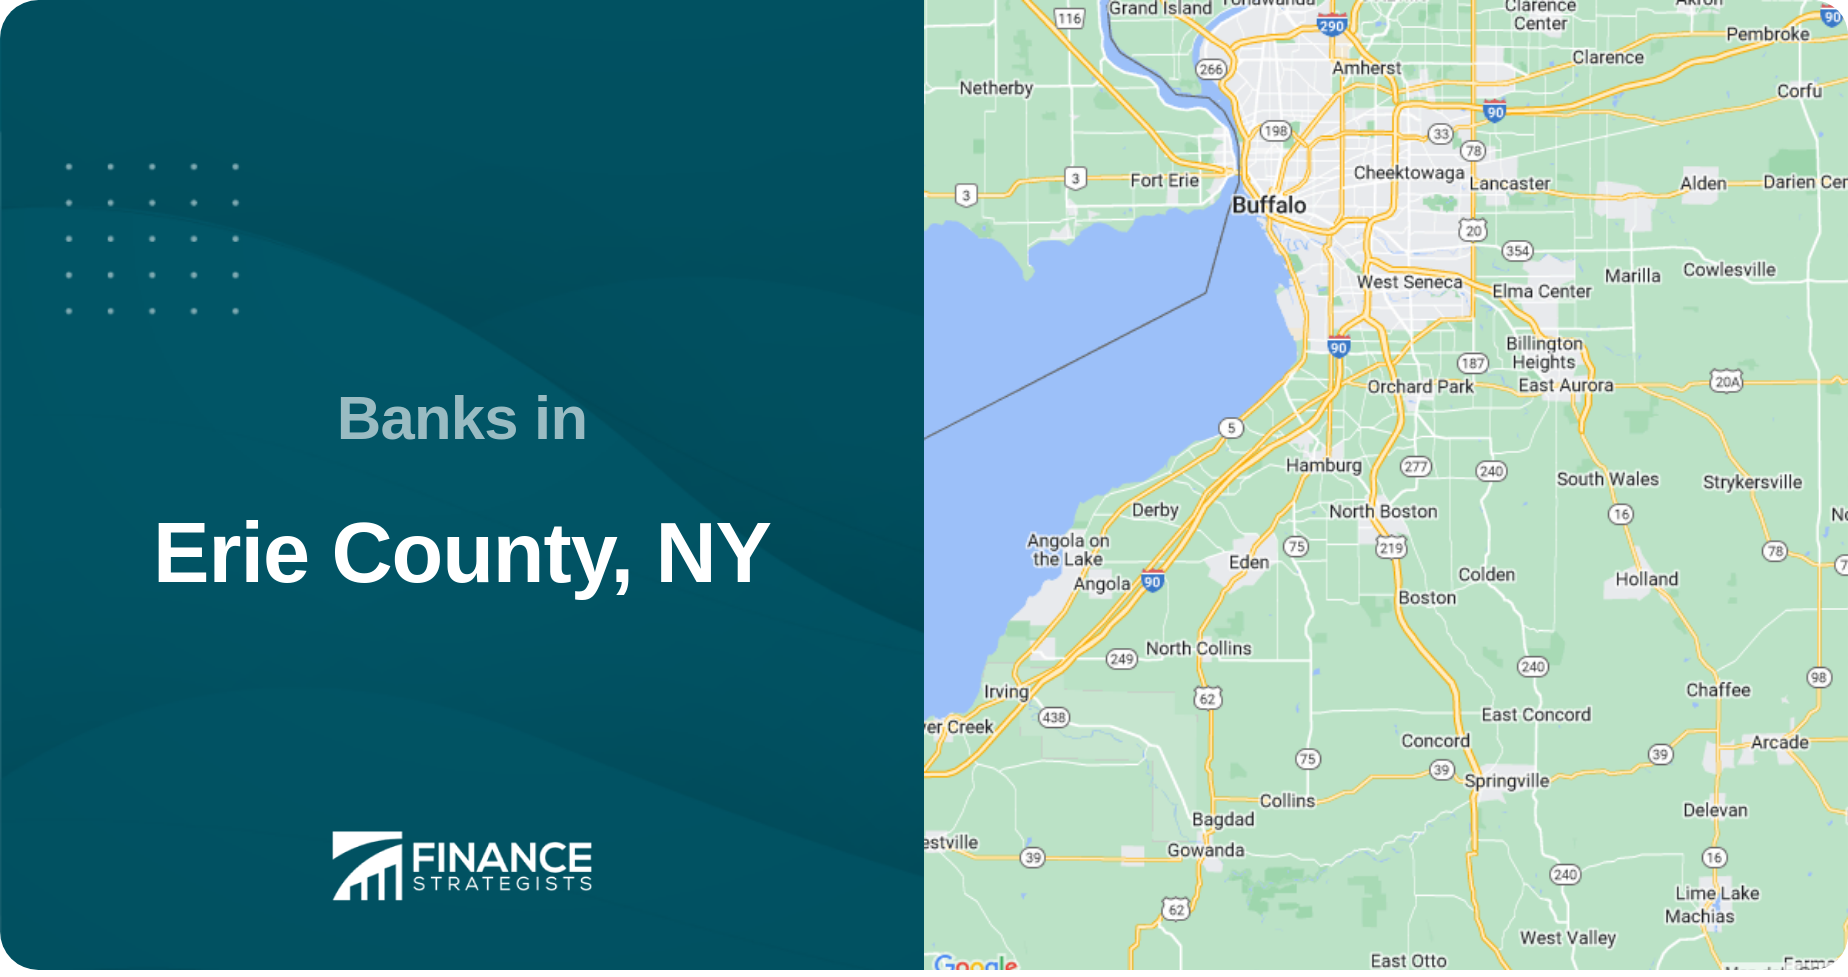 Banks in Erie County, NY